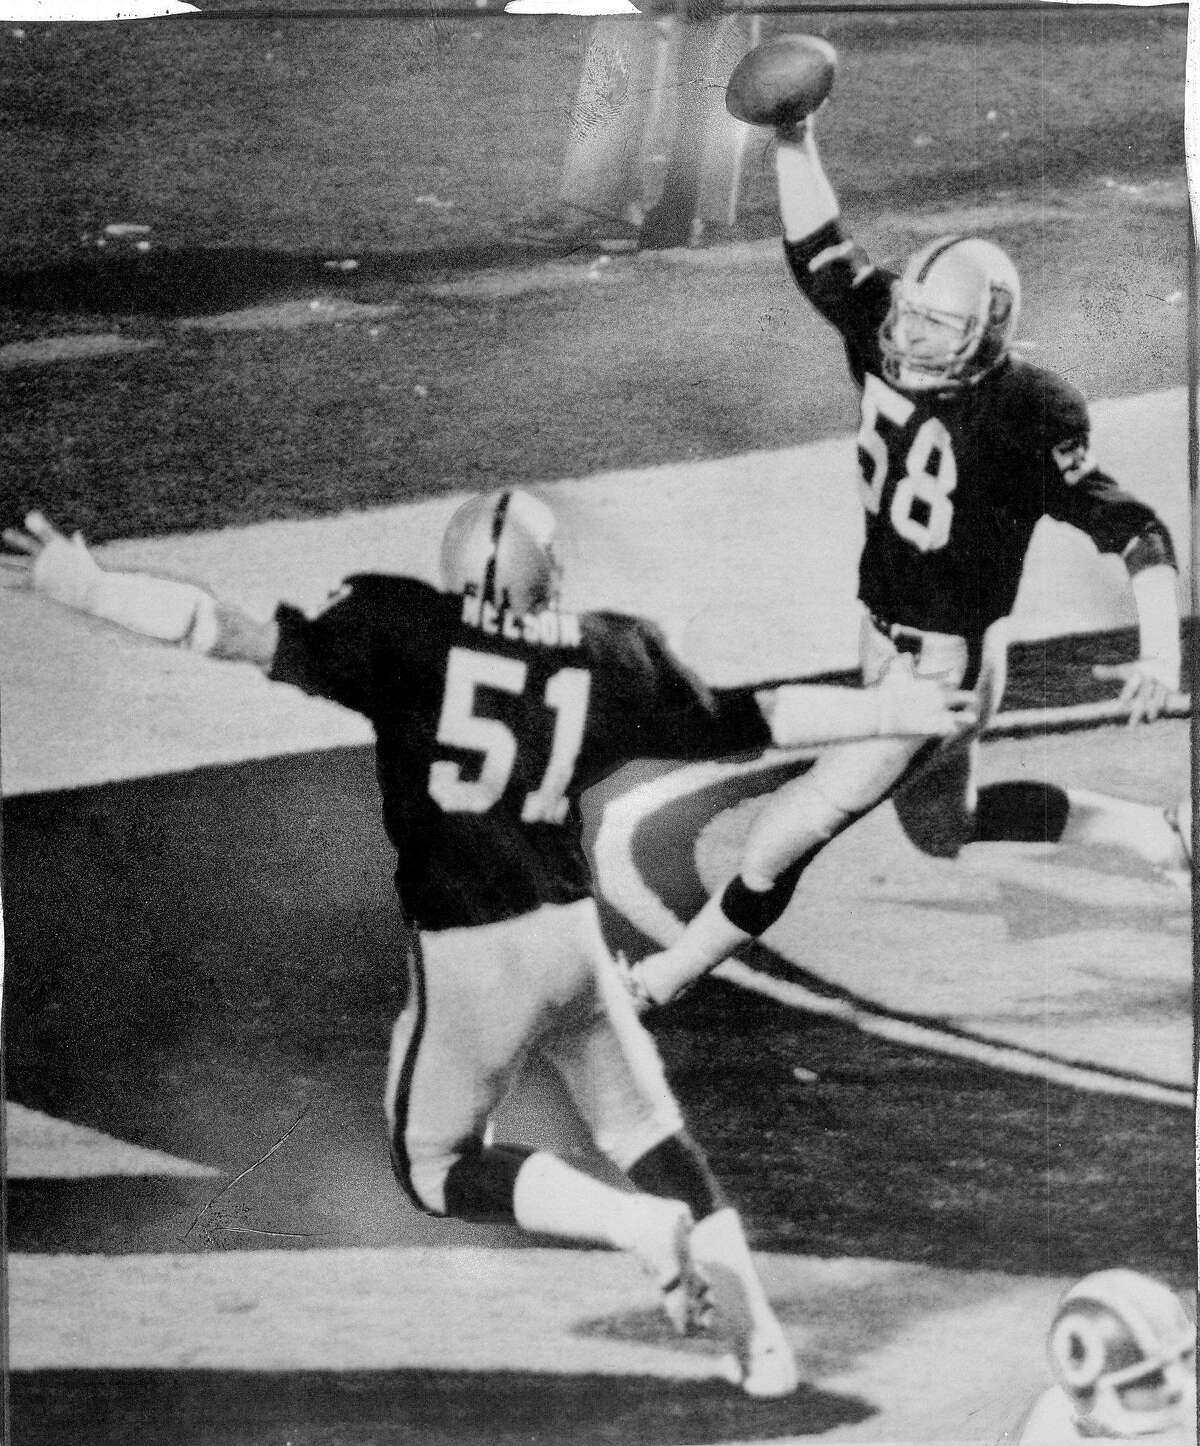 Jack Squirek intercepts a screen pass and runs it in for a touchdown in Super Bowl XVIII. vs the Washington Redskins January 23, 1984